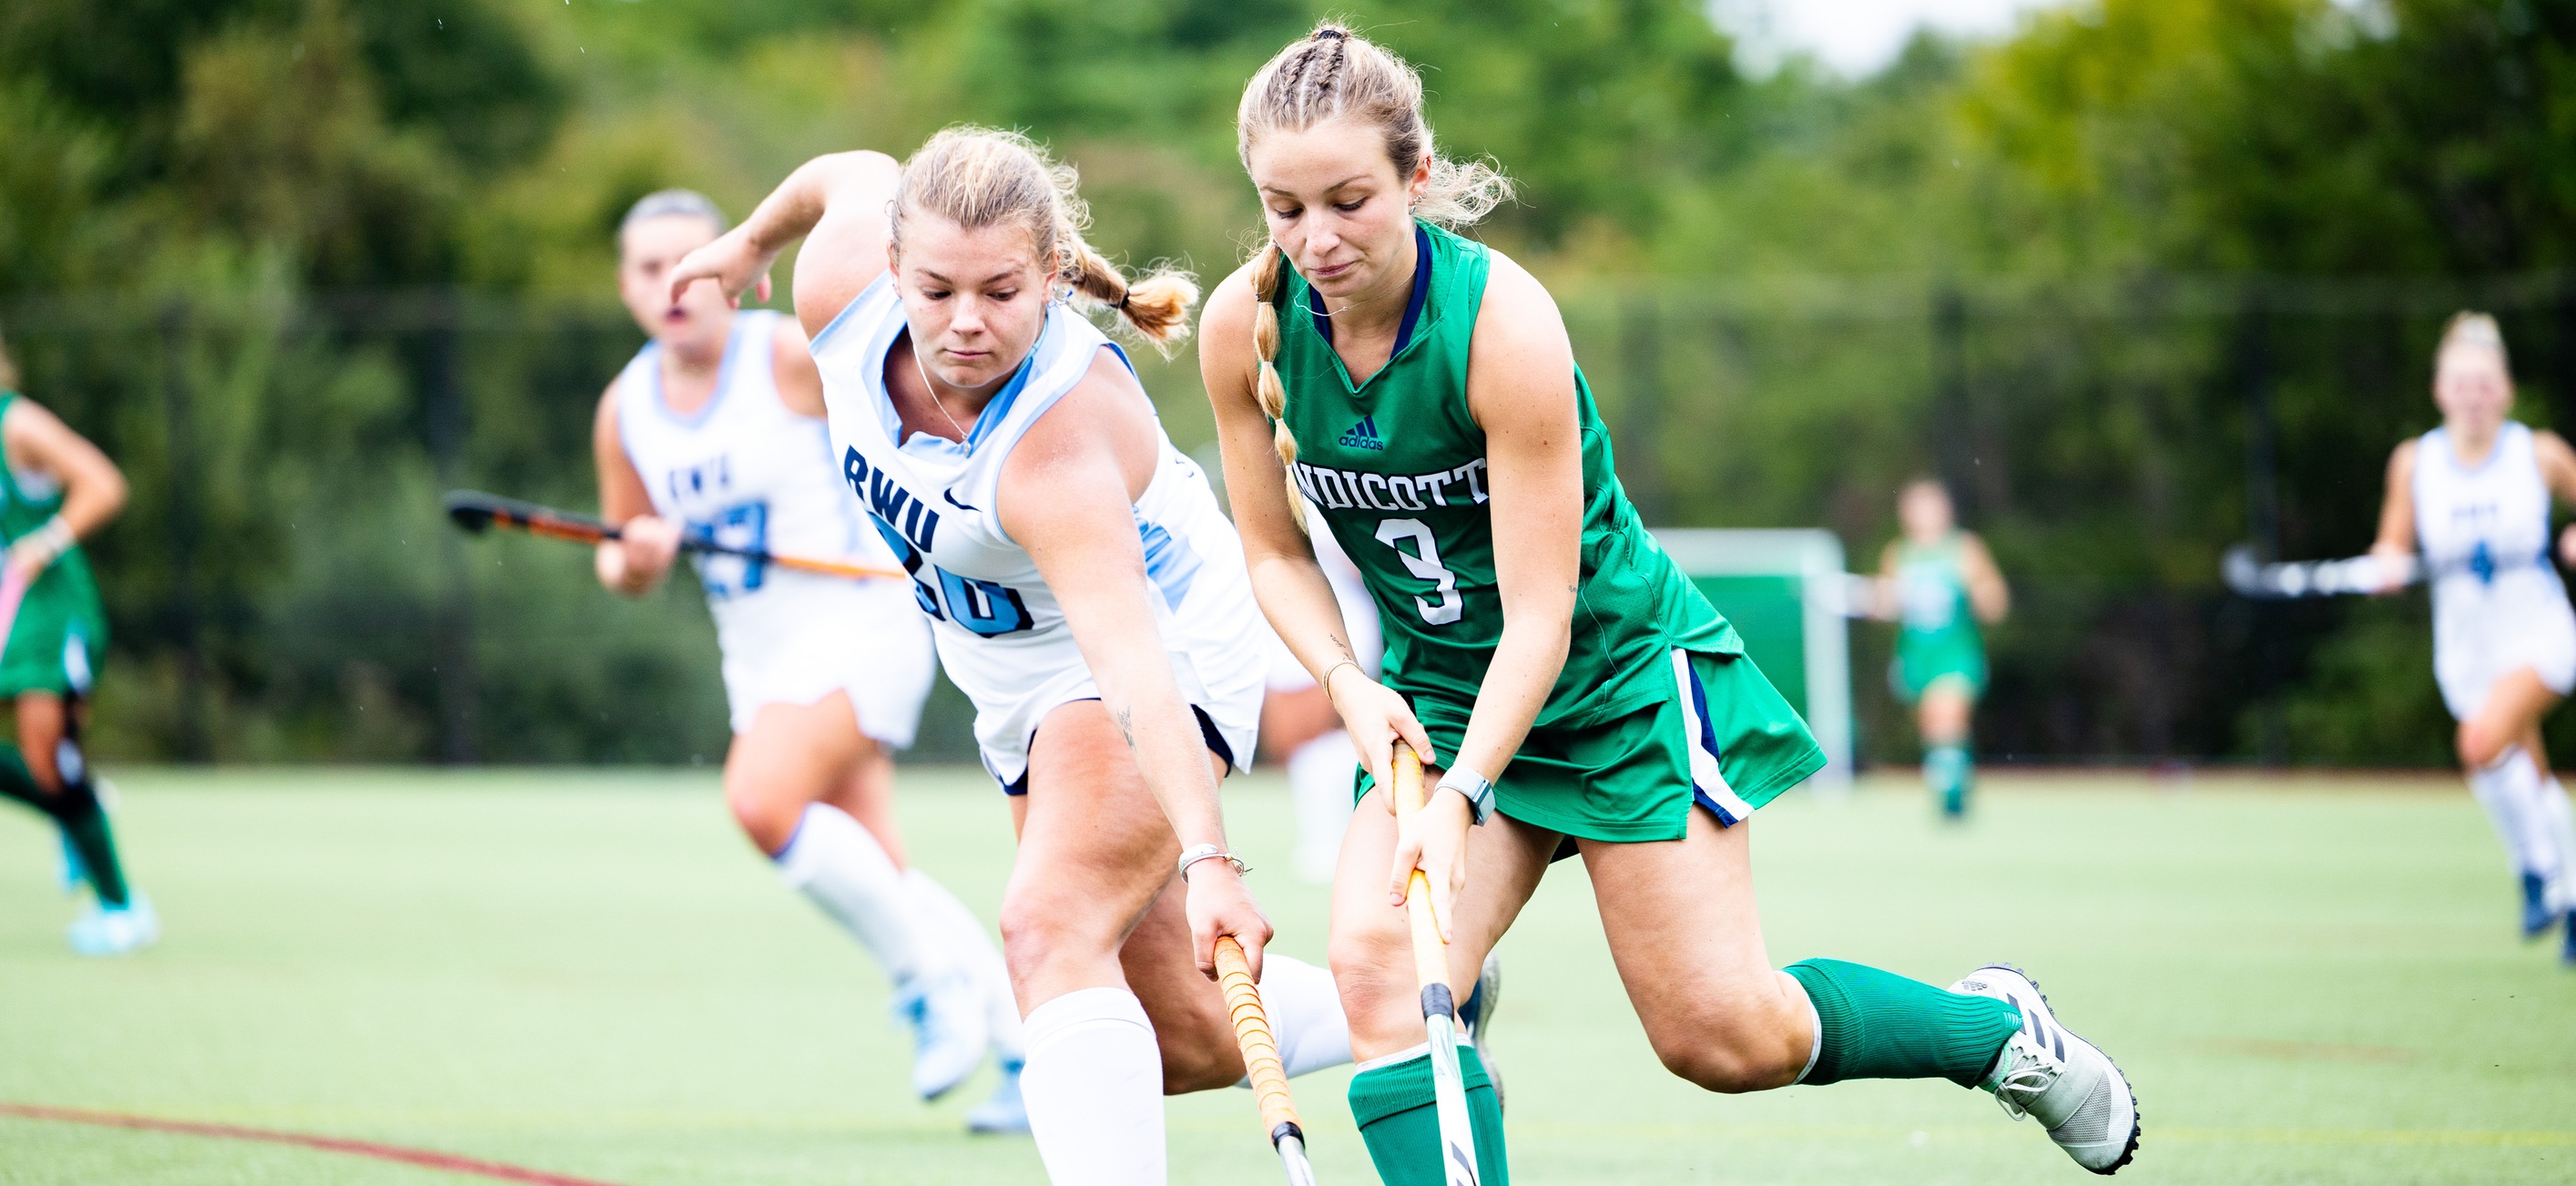 Field Hockey Prevails Over Southern Maine, 4-1